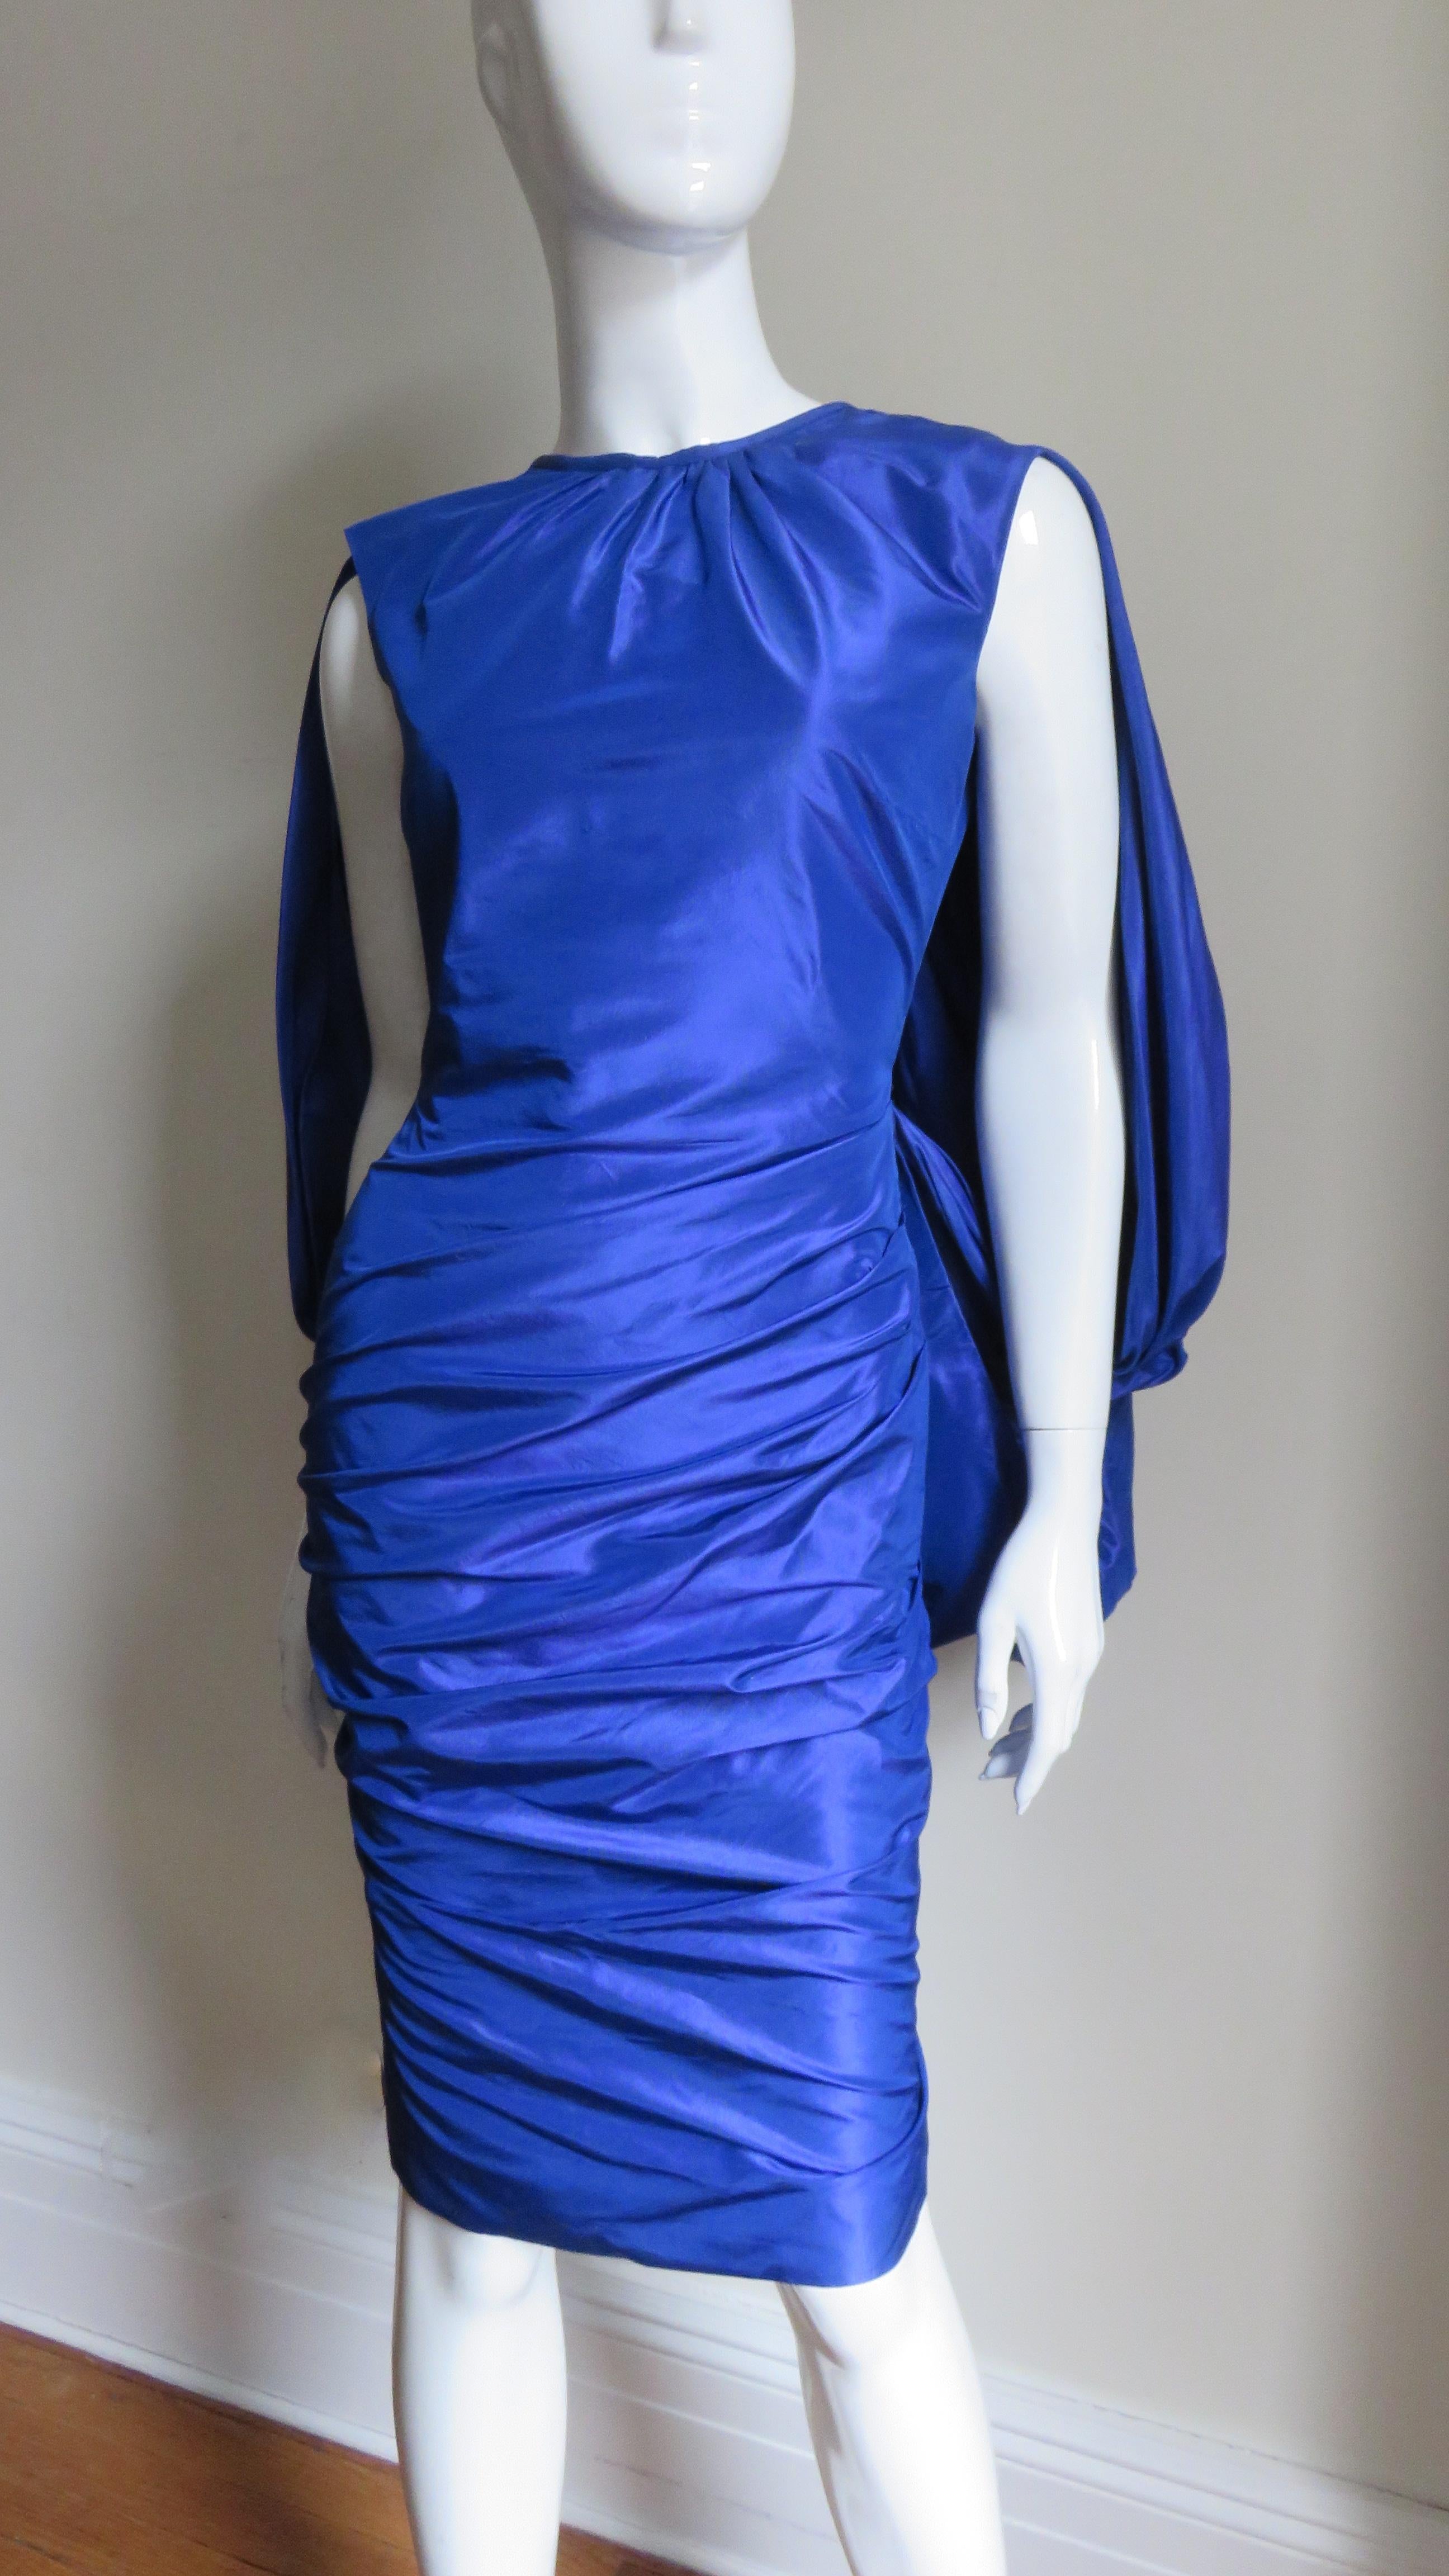 This is a gorgeous cobalt blue silk dress by Tom Ford.  It is sleeveless and fitted with a ruched skirt. The back is scooped mid way with a fabulous gathered pouf drape emanating from it to hip length to be draped as desired.    It is fully lined in